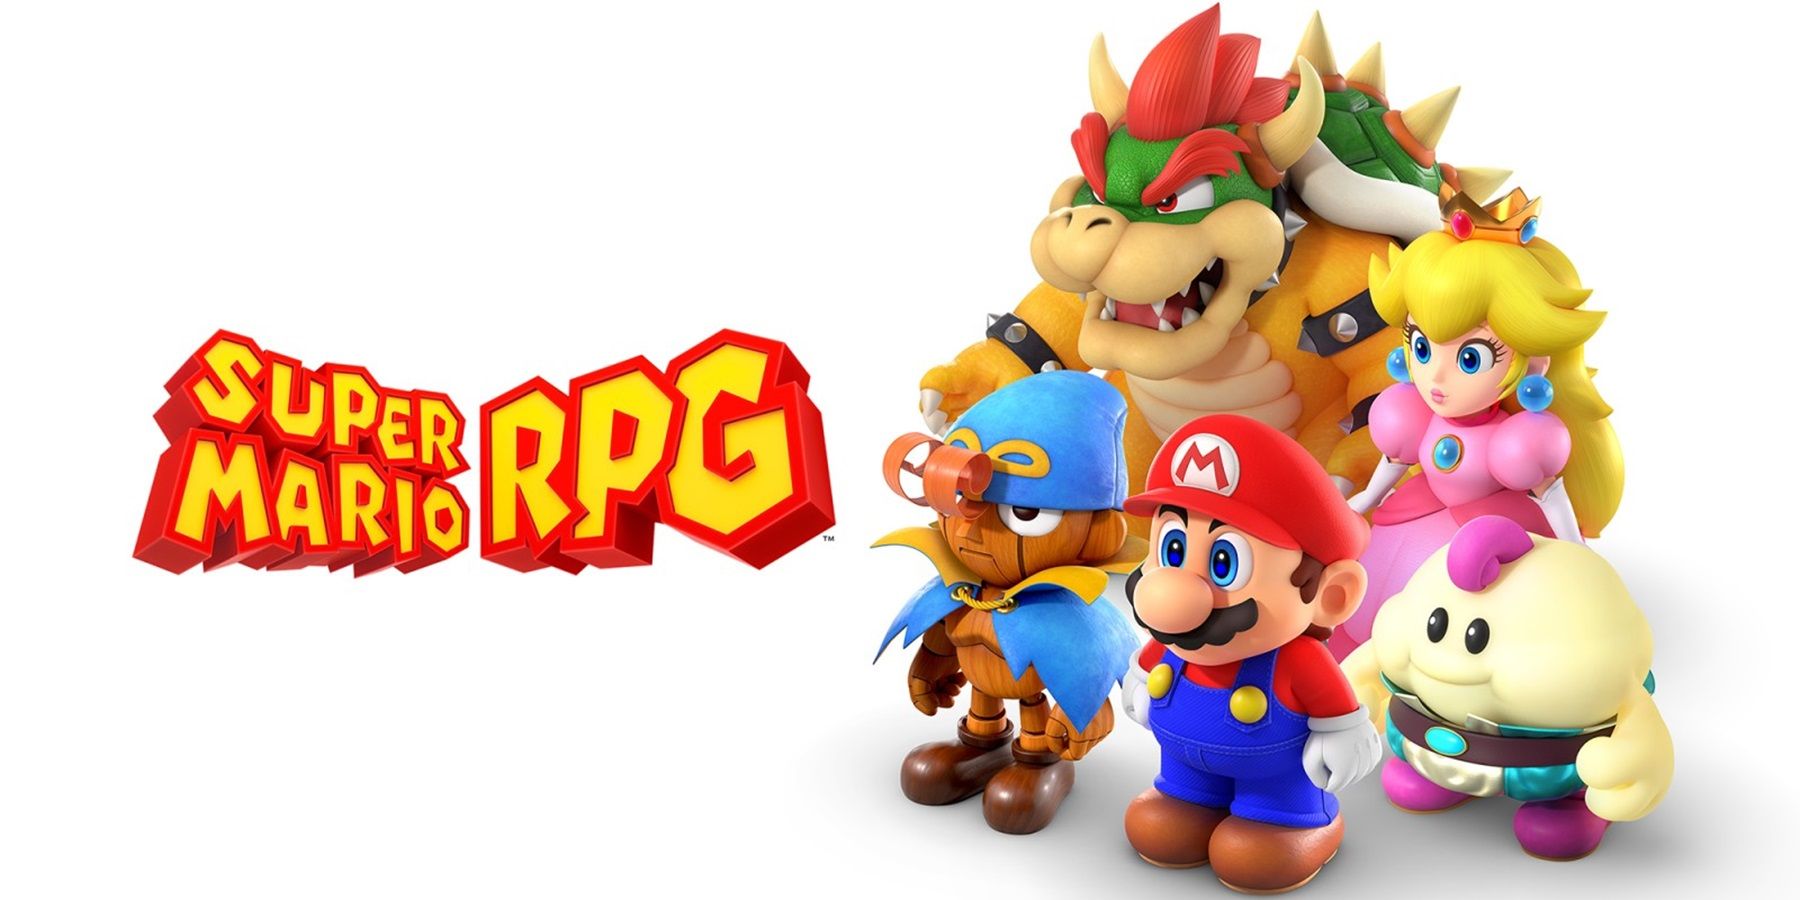 All Super Mario RPG Playable Characters, Ranked Worst To Best